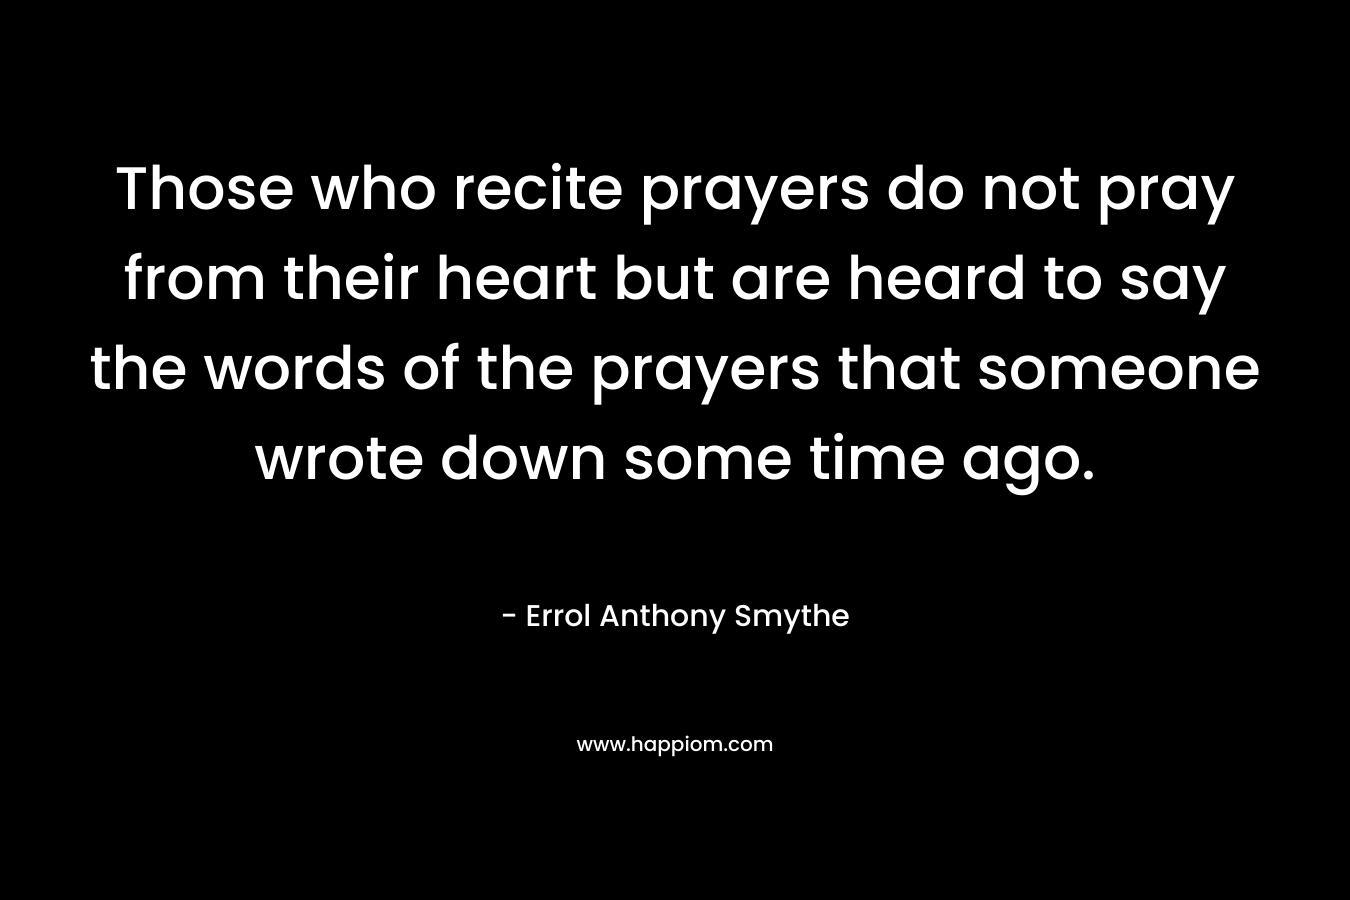 Those who recite prayers do not pray from their heart but are heard to say the words of the prayers that someone wrote down some time ago.